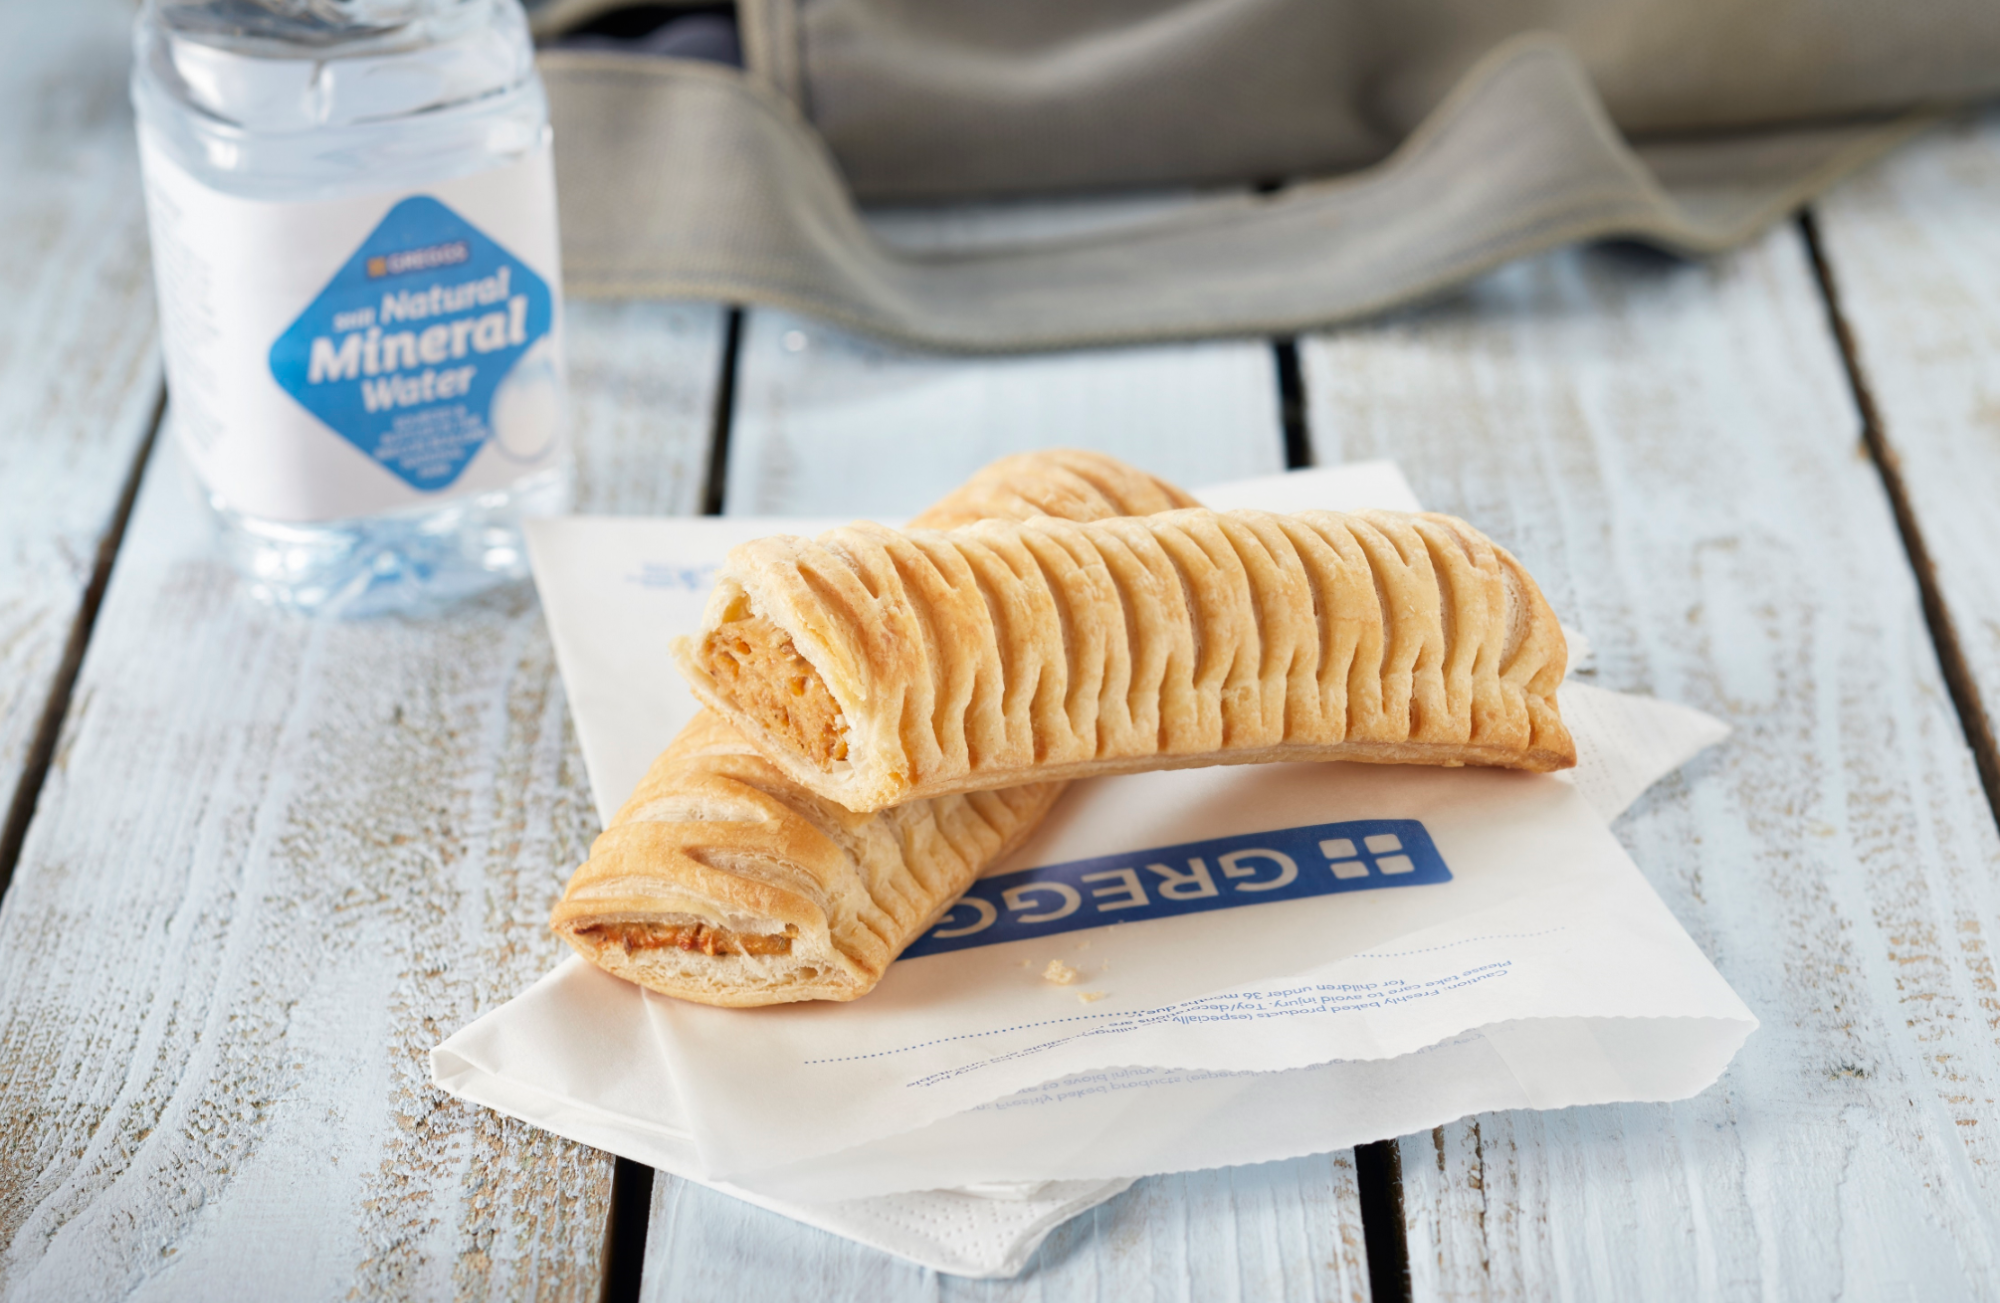 Greggs is blasted for photo of a sausage roll being eaten from the